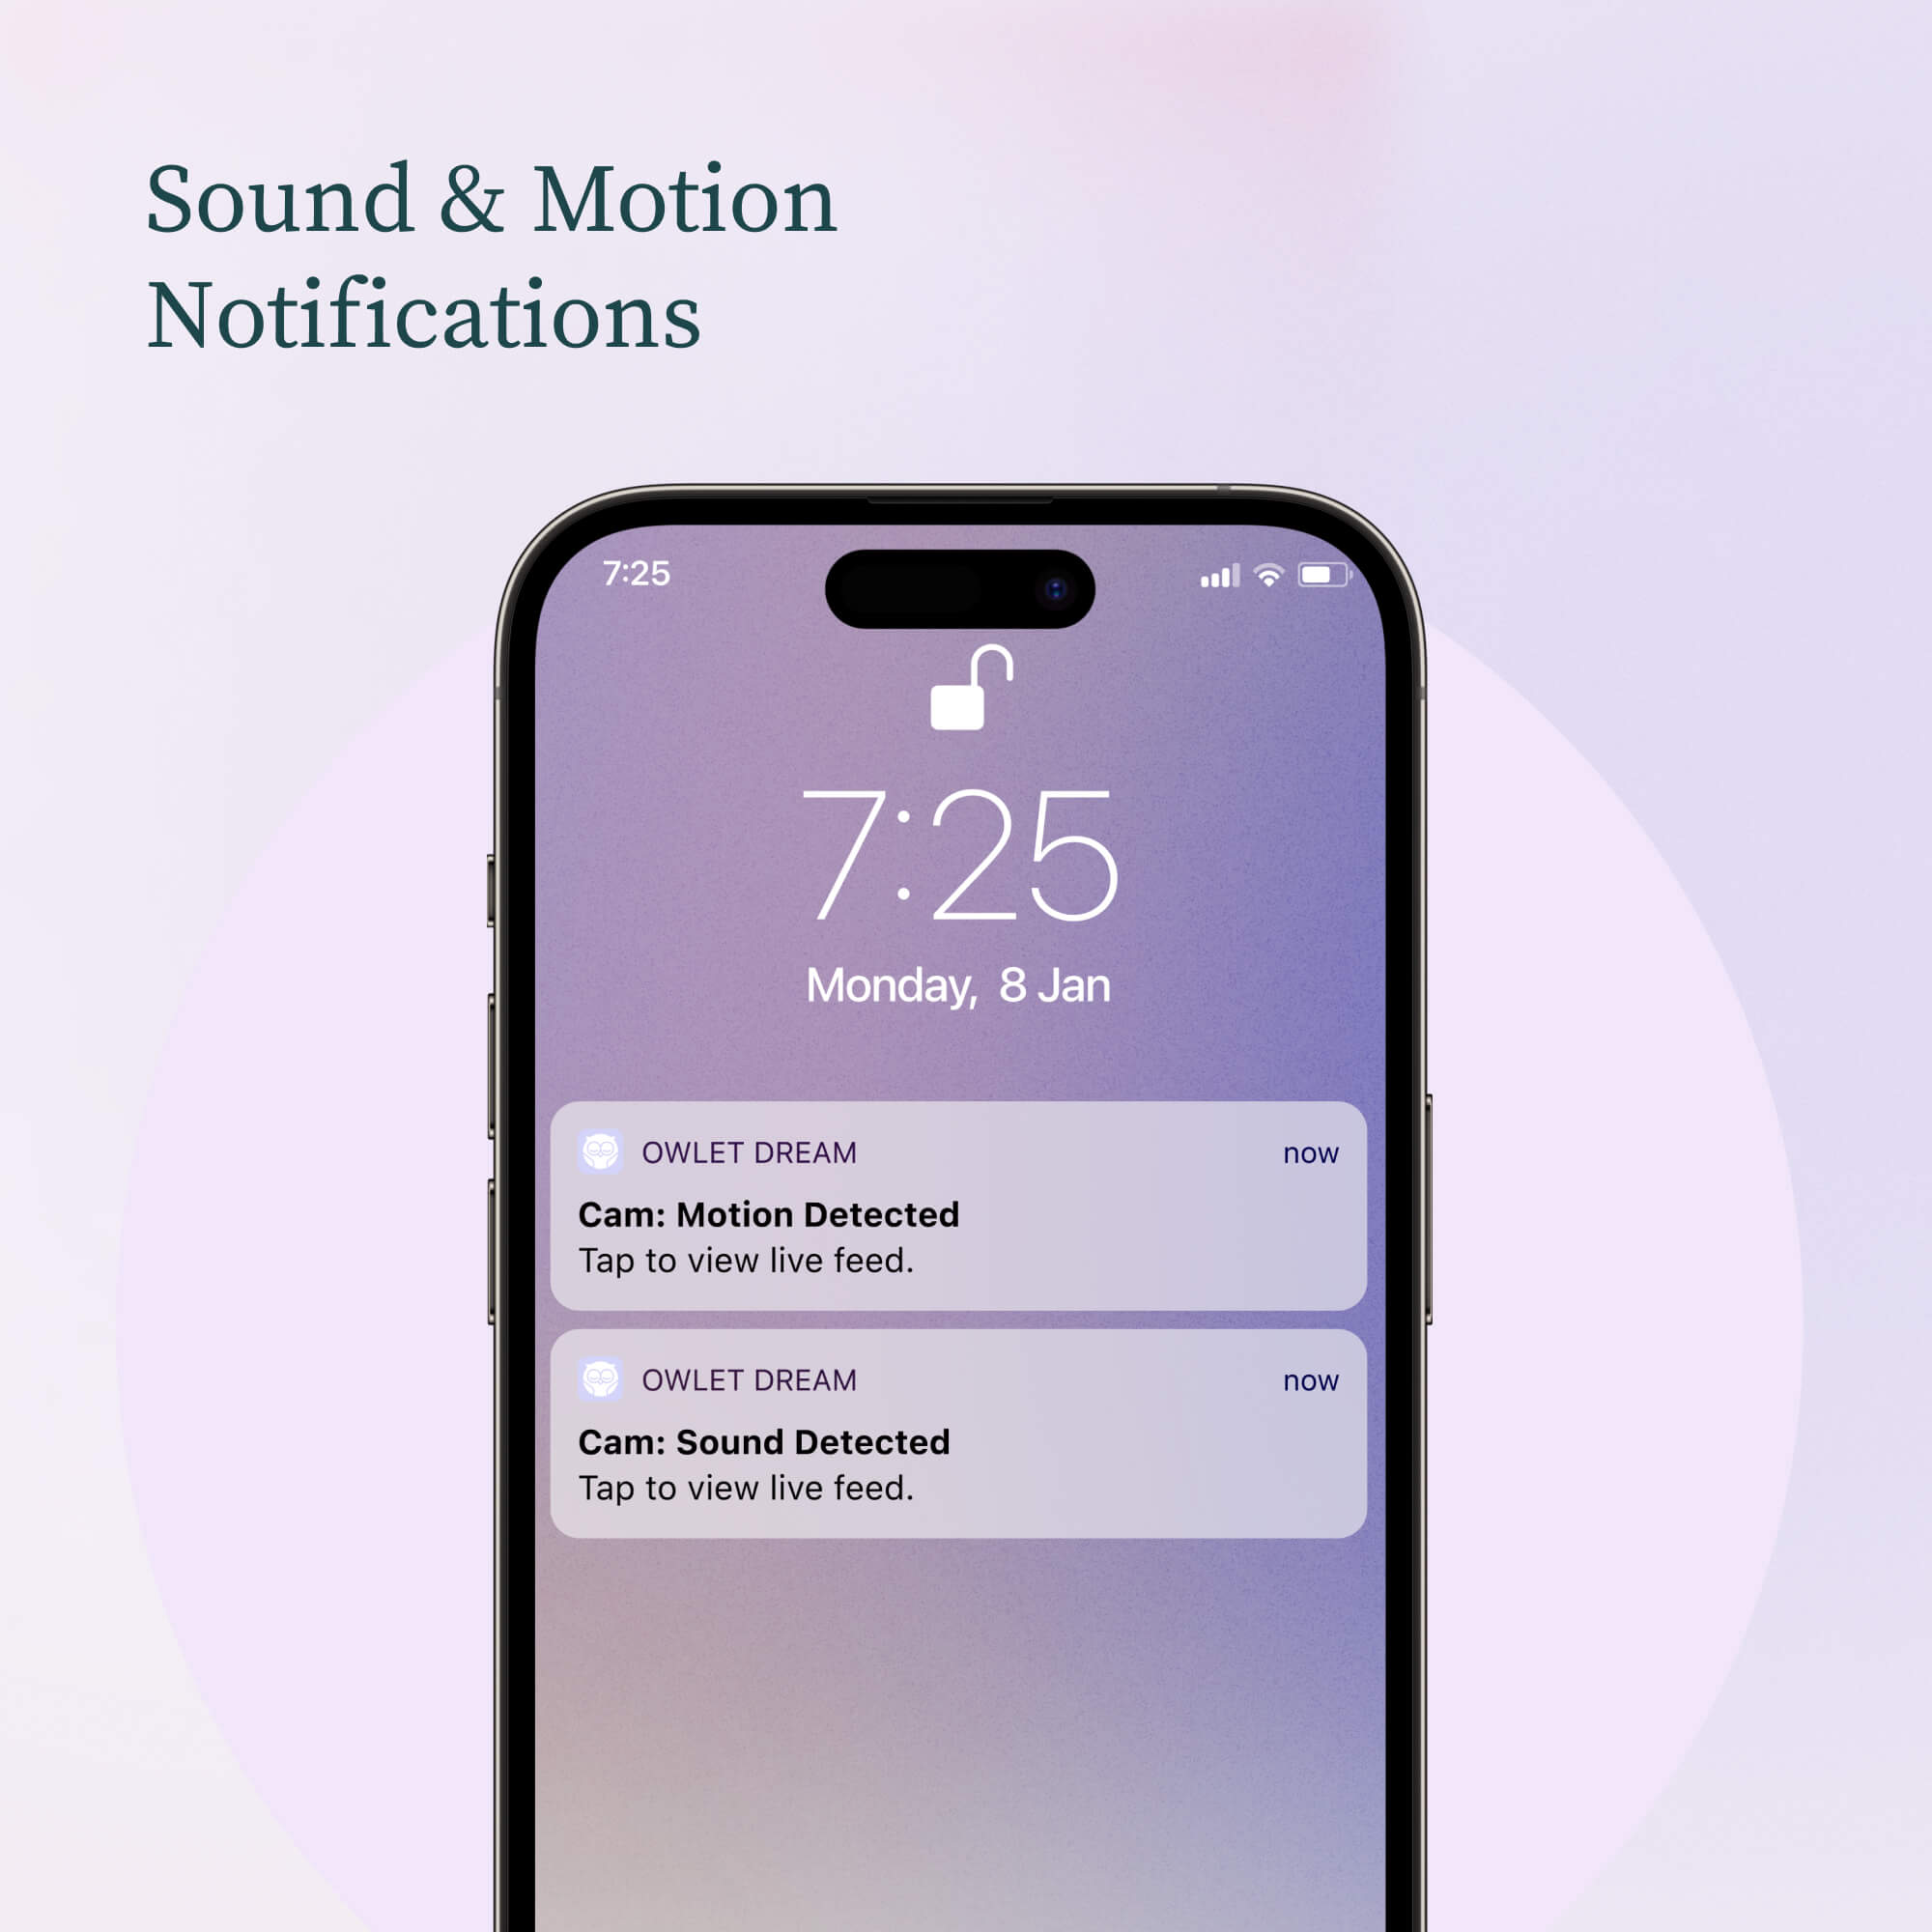 Sound and motion notifications